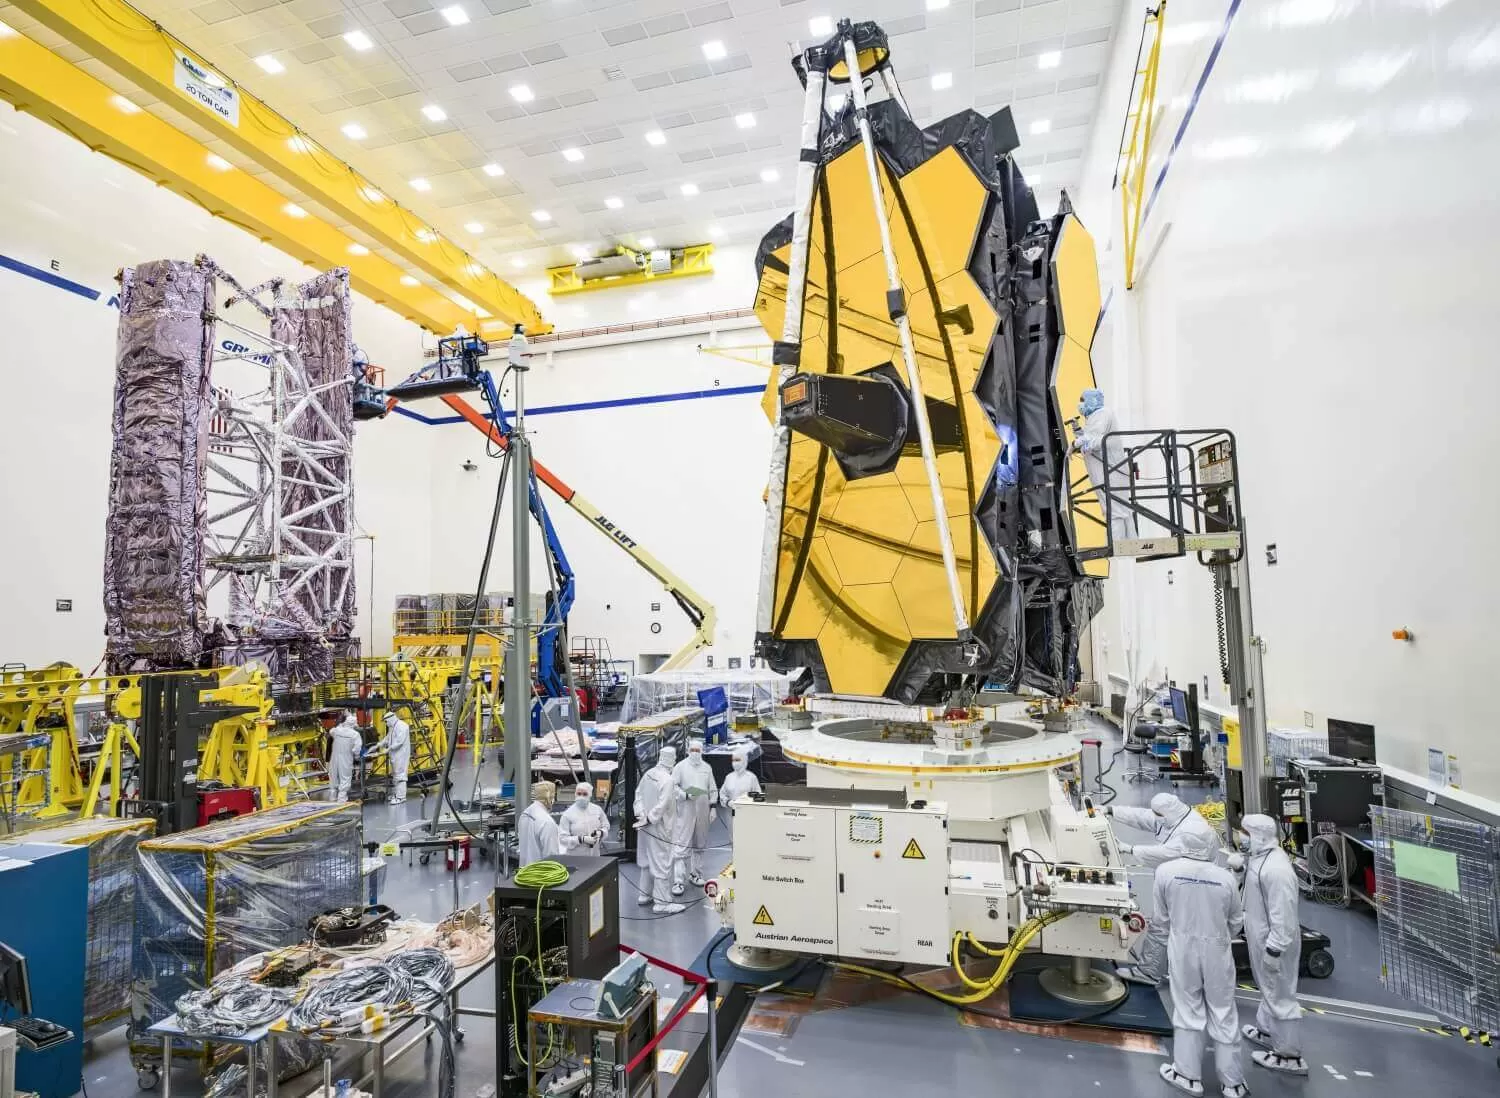 NASA says James Webb Space Telescope won't launch in March as planned